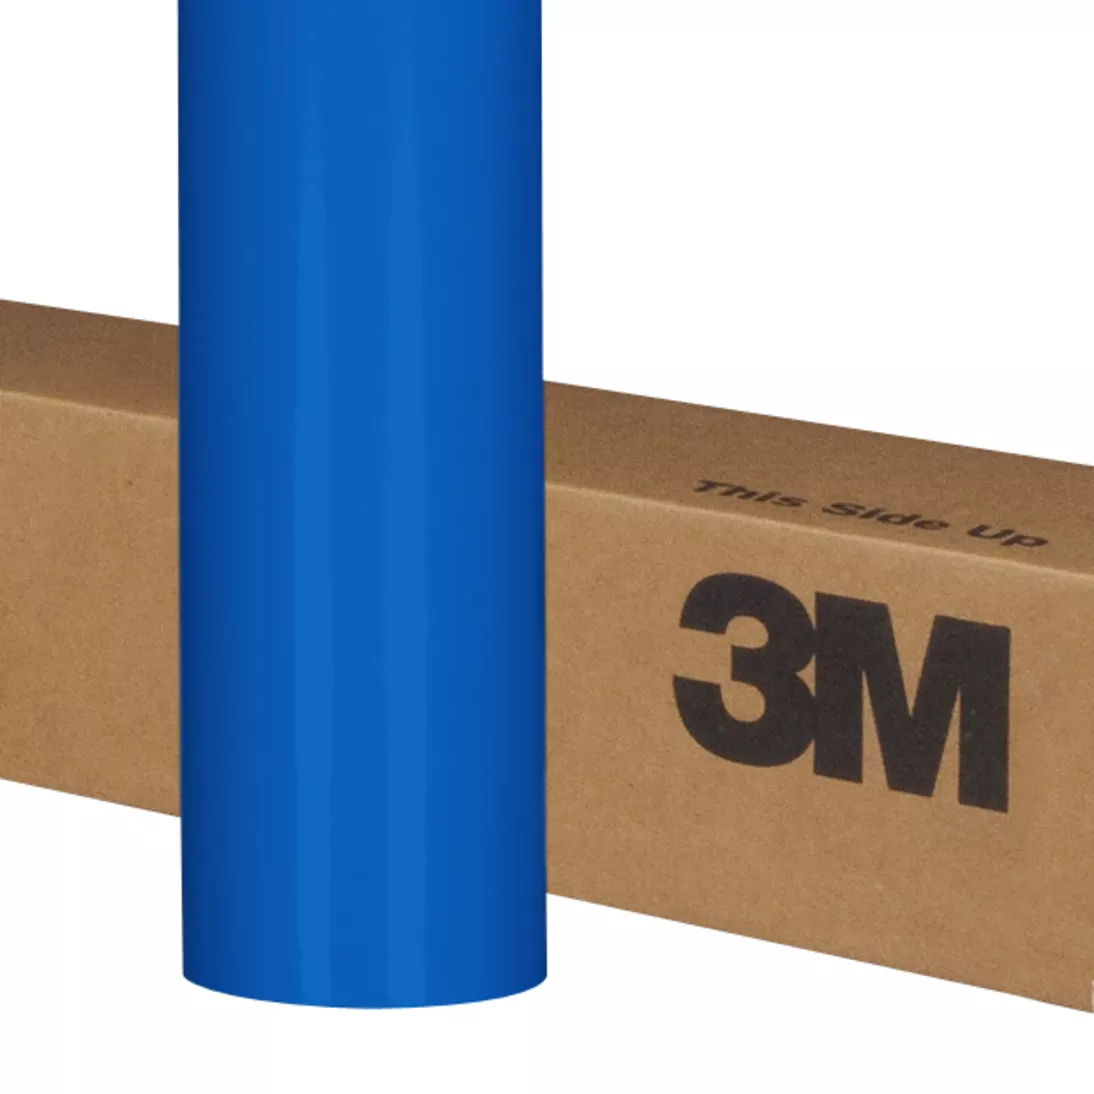 3M™ Scotchcal™ ElectroCut™ Graphic Film 7125-57, Olympic Blue, 48 in x
50 yd